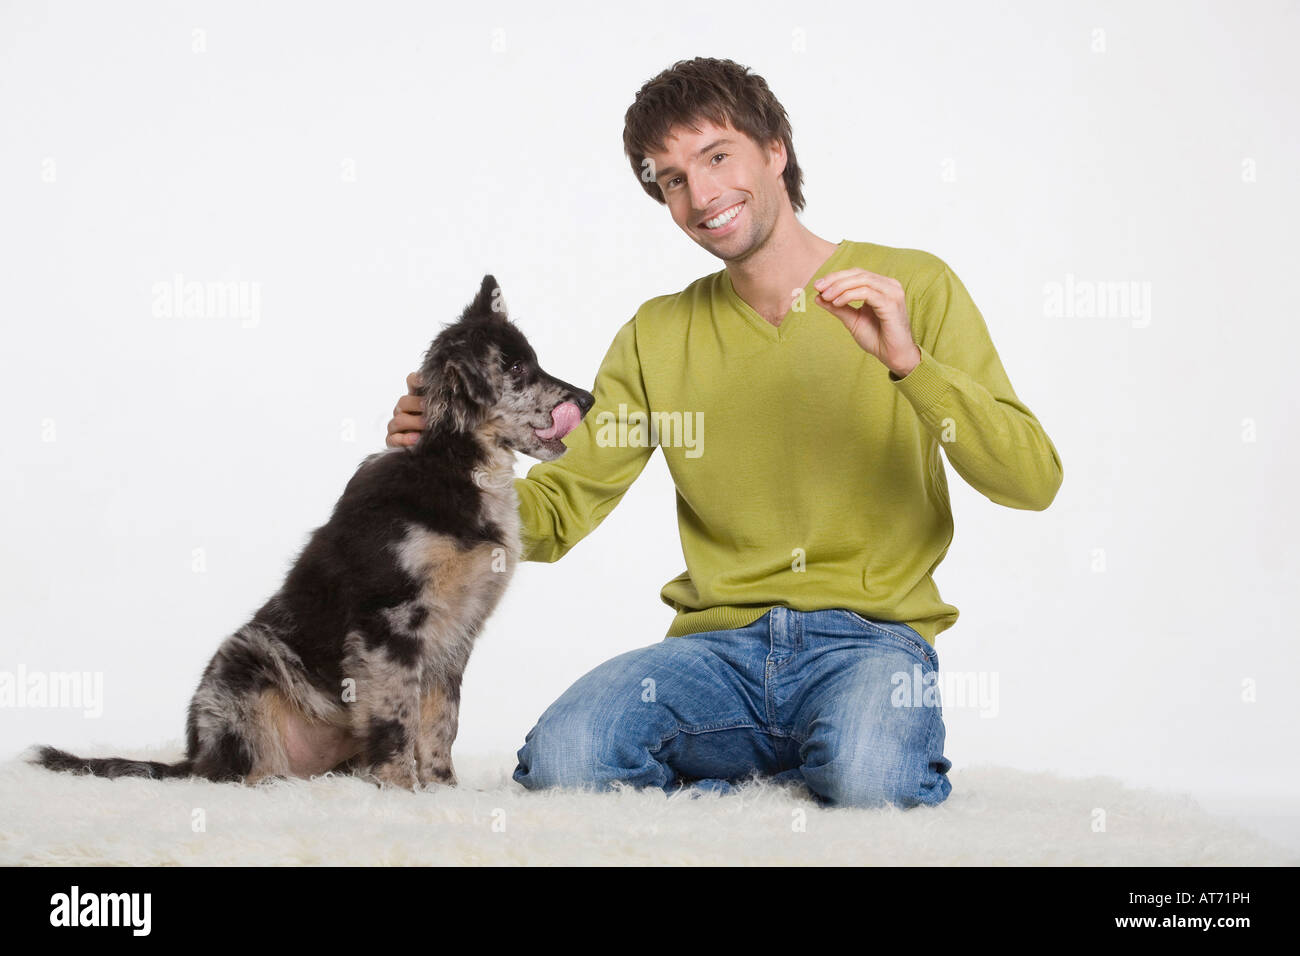 Young man with dog, portrait Stock Photo